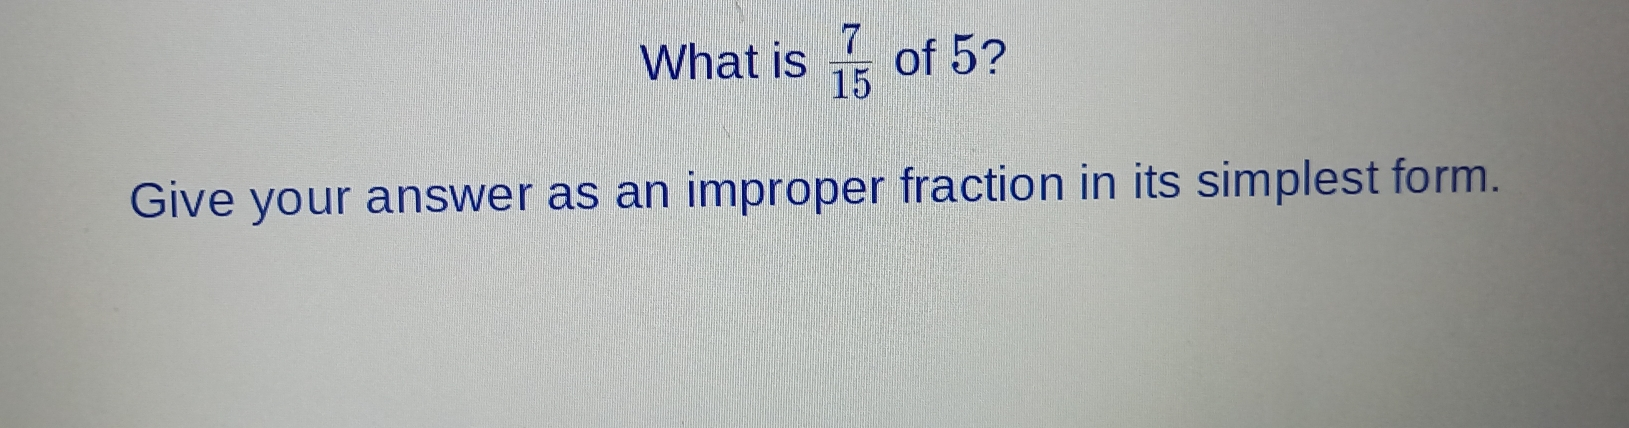 What is 7/15 of 5? Give your answer as an improper fraction in its simplest form